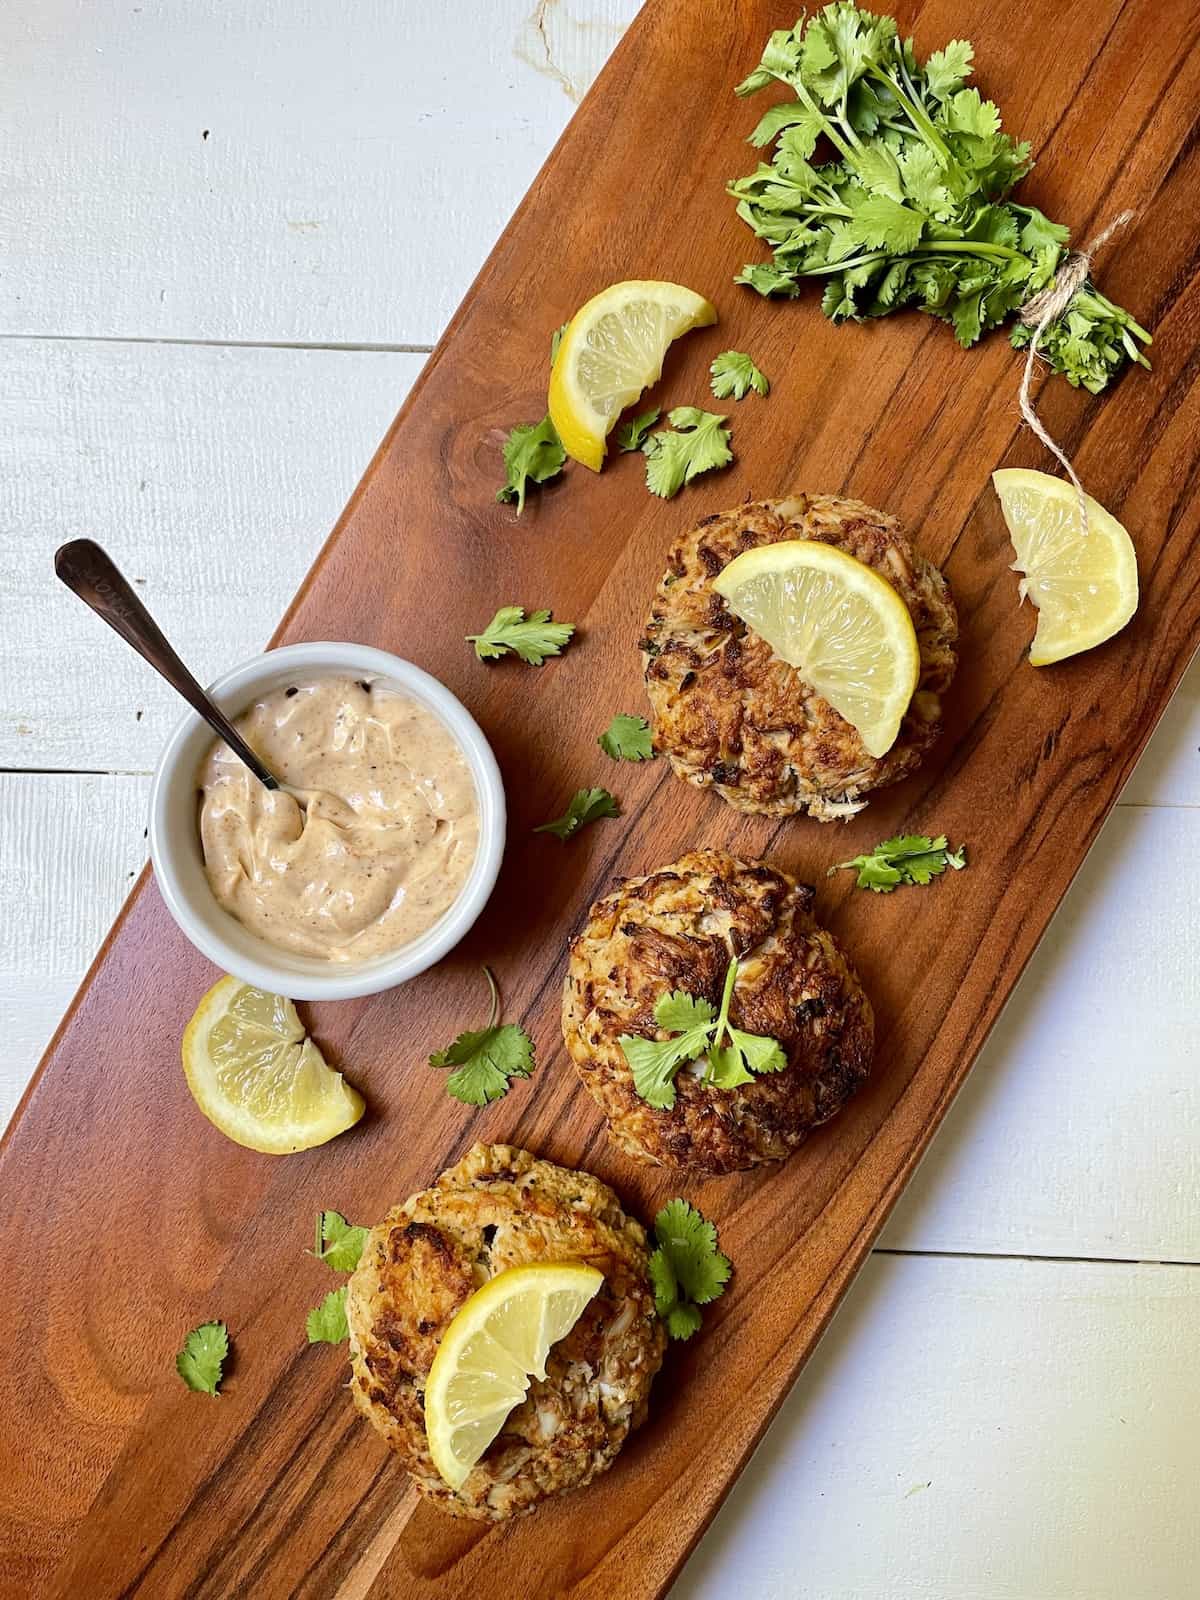 Crab cakes on a wood board with lemon and parsley.